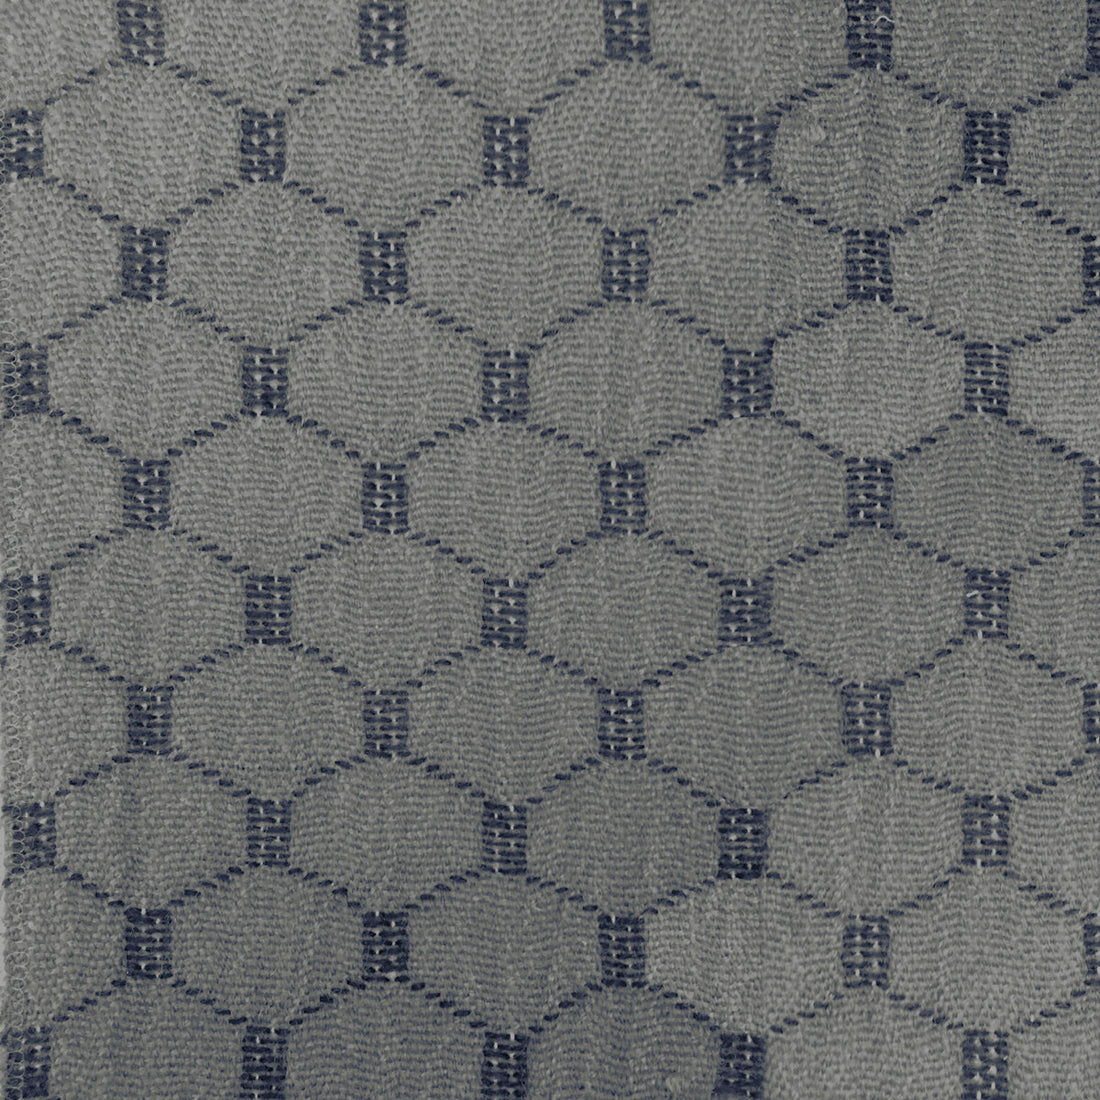 Gredos fabric in gris/navy color - pattern LCT5458.004.0 - by Gaston y Daniela in the Lorenzo Castillo IV collection